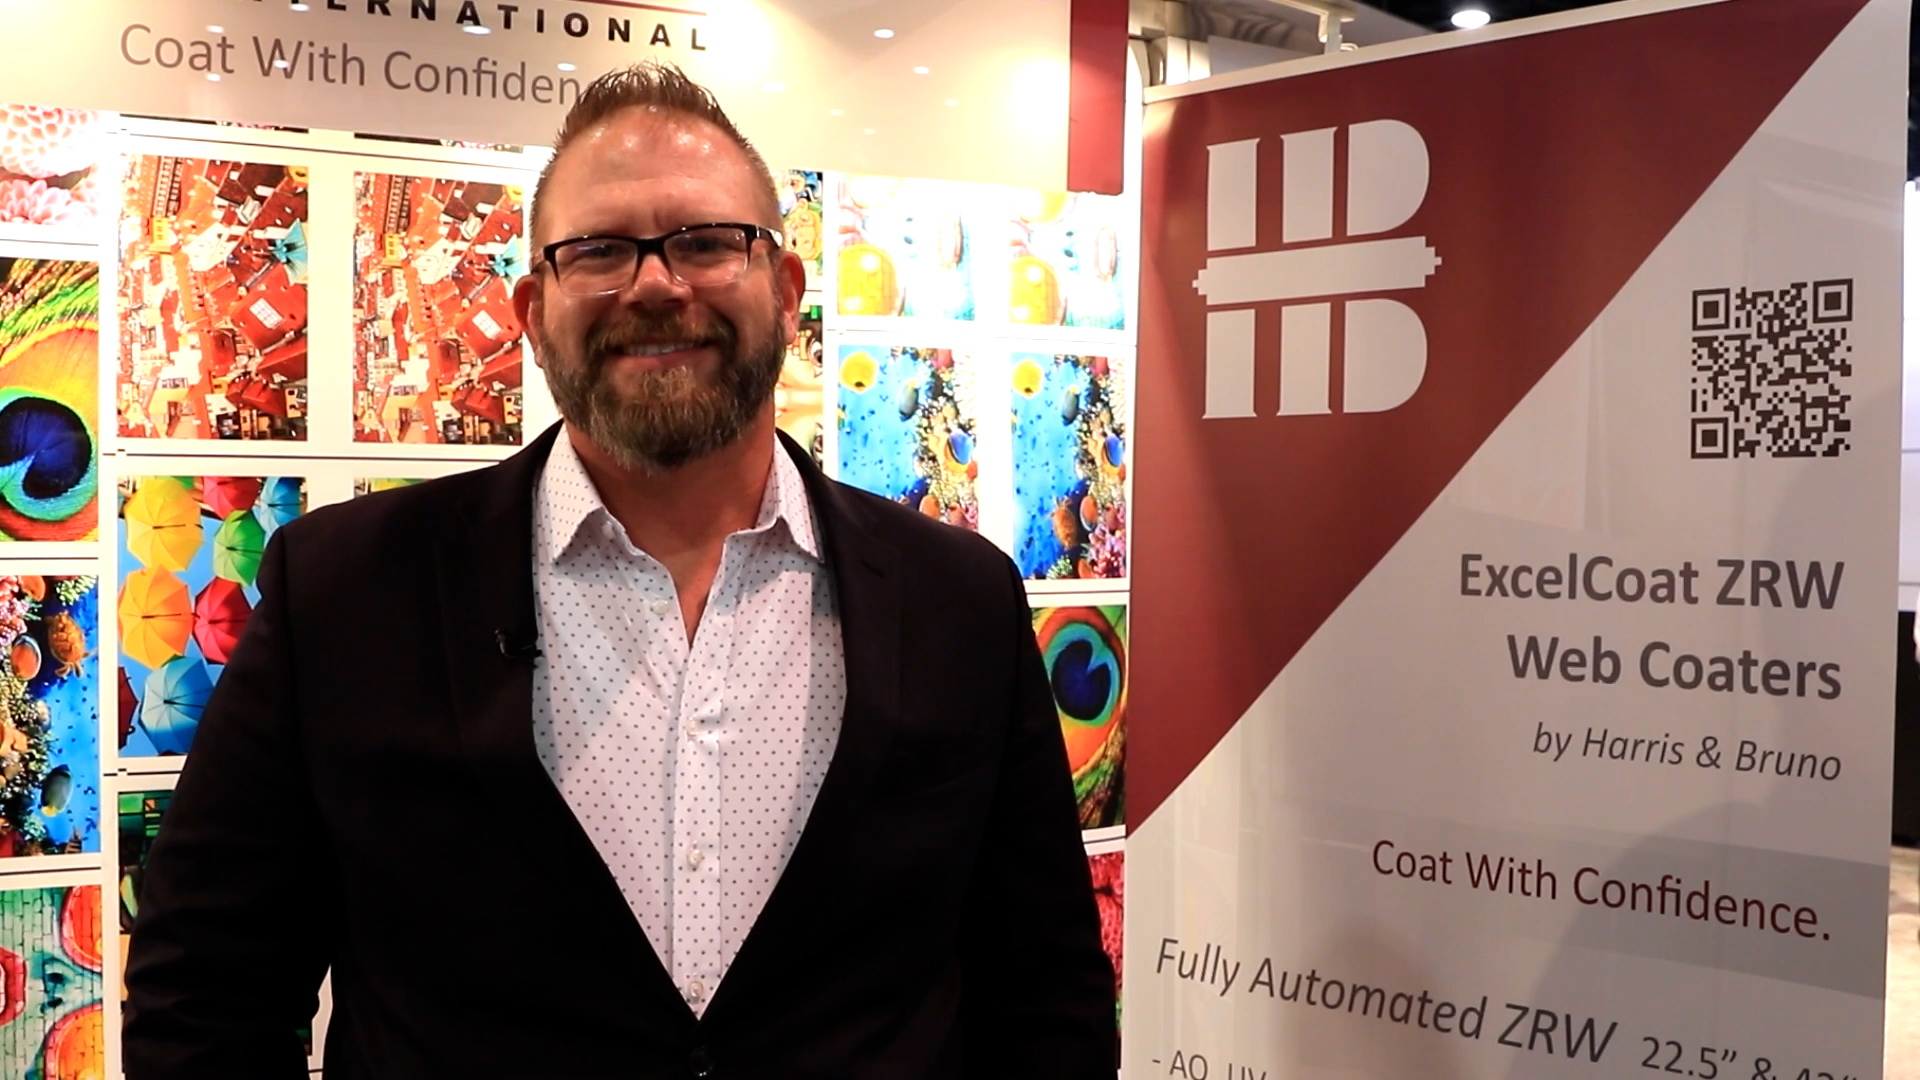 Product Strategy: Chris Hogge on Harris & Bruno's Coating Solutions for Continuous Feed Inkjet